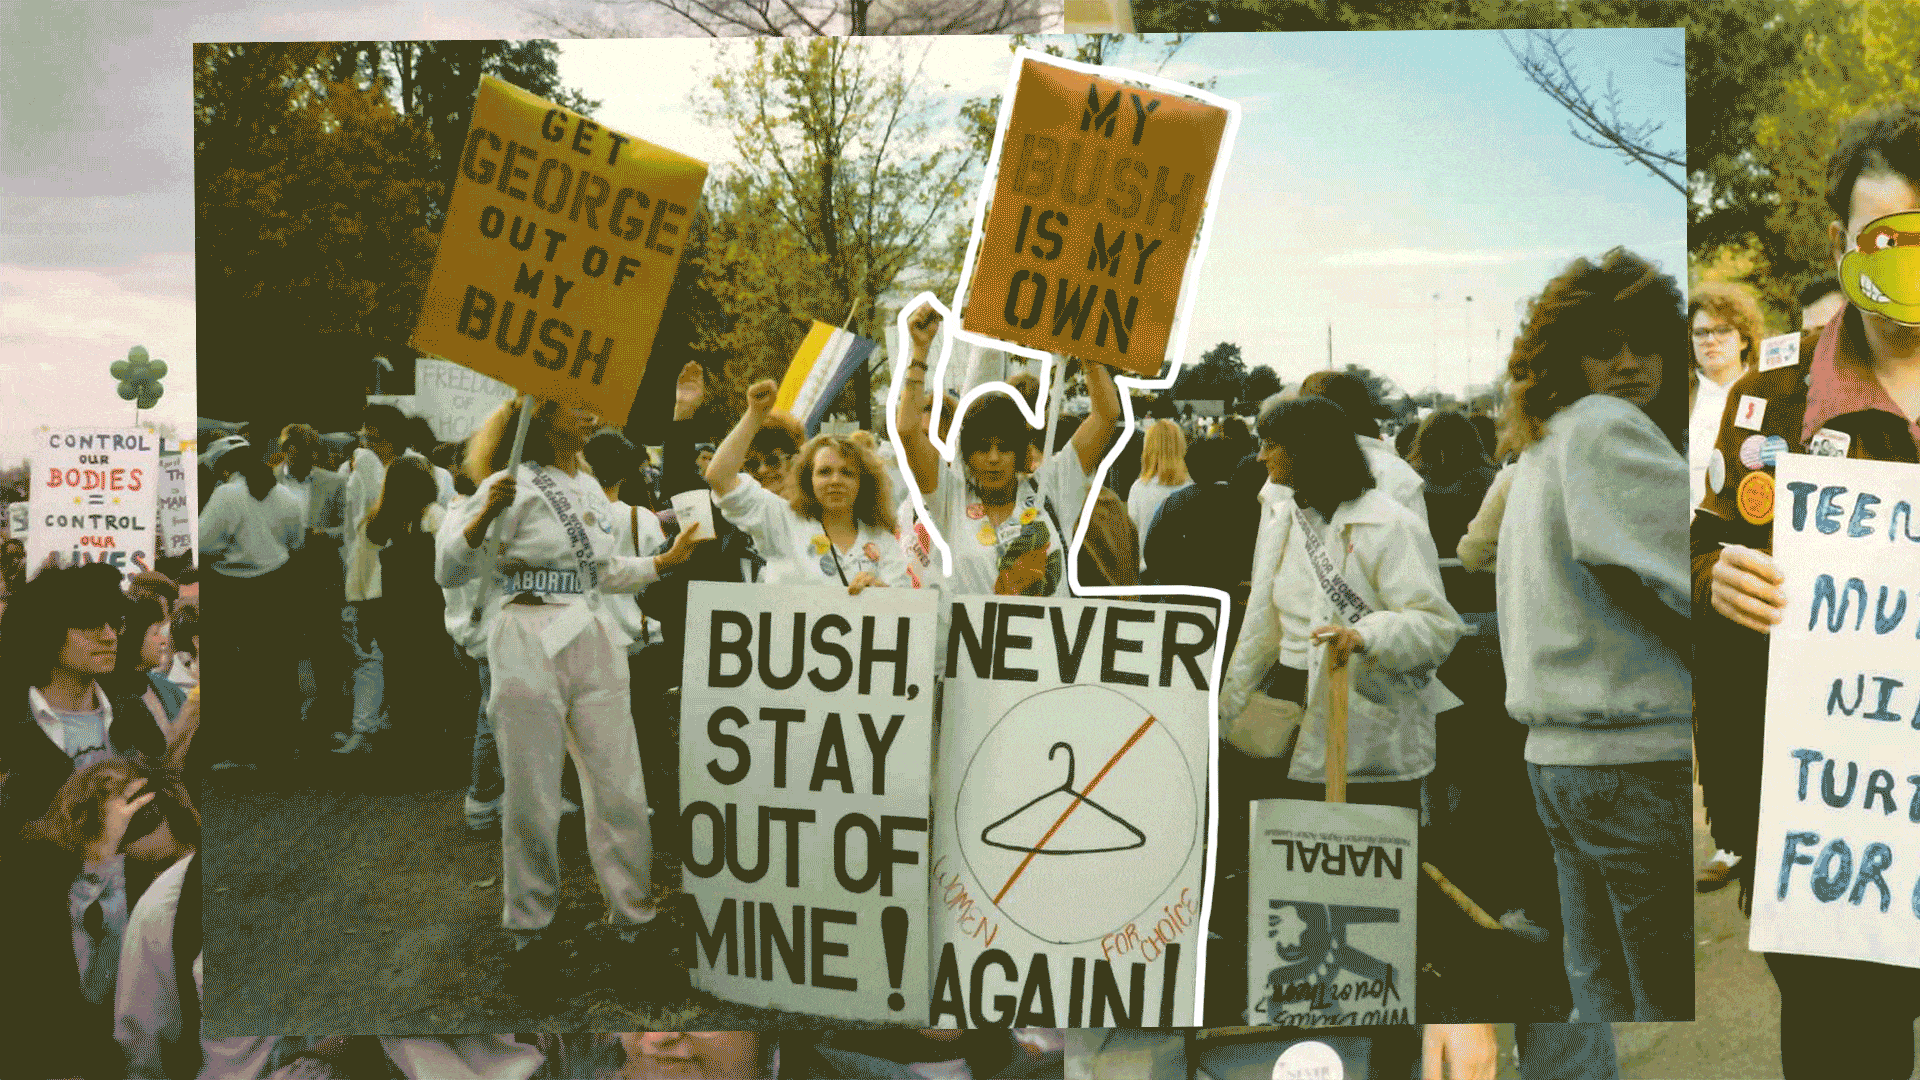 Vivienne Esrig at an abortion rights protest holding up a sign that reads "my bush is my own"